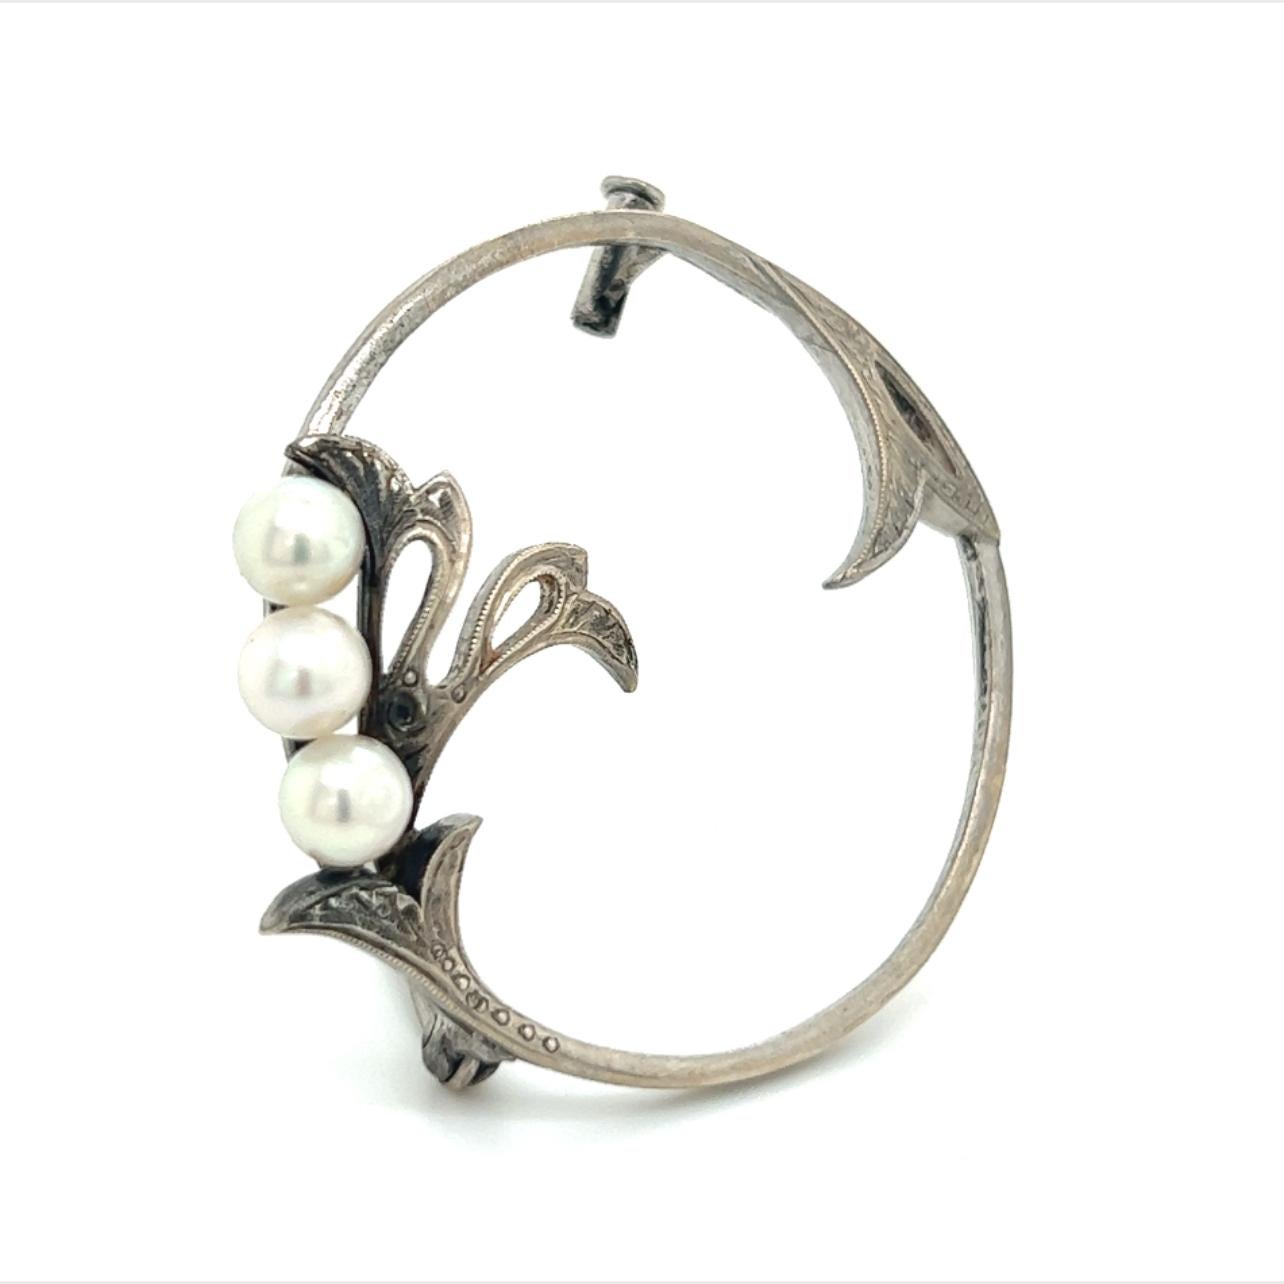 Mikimoto Estate Akoya Pearl Brooch Pin Sterling Silver 4.65 mm M280

This elegant Authentic Mikimoto Estate sterling silver brooch has 3 Saltwater Akoya Cultured Pearls 4.65 MM and has a weight of 4.2 Grams.

TRUSTED SELLER SINCE 2002

PLEASE SEE